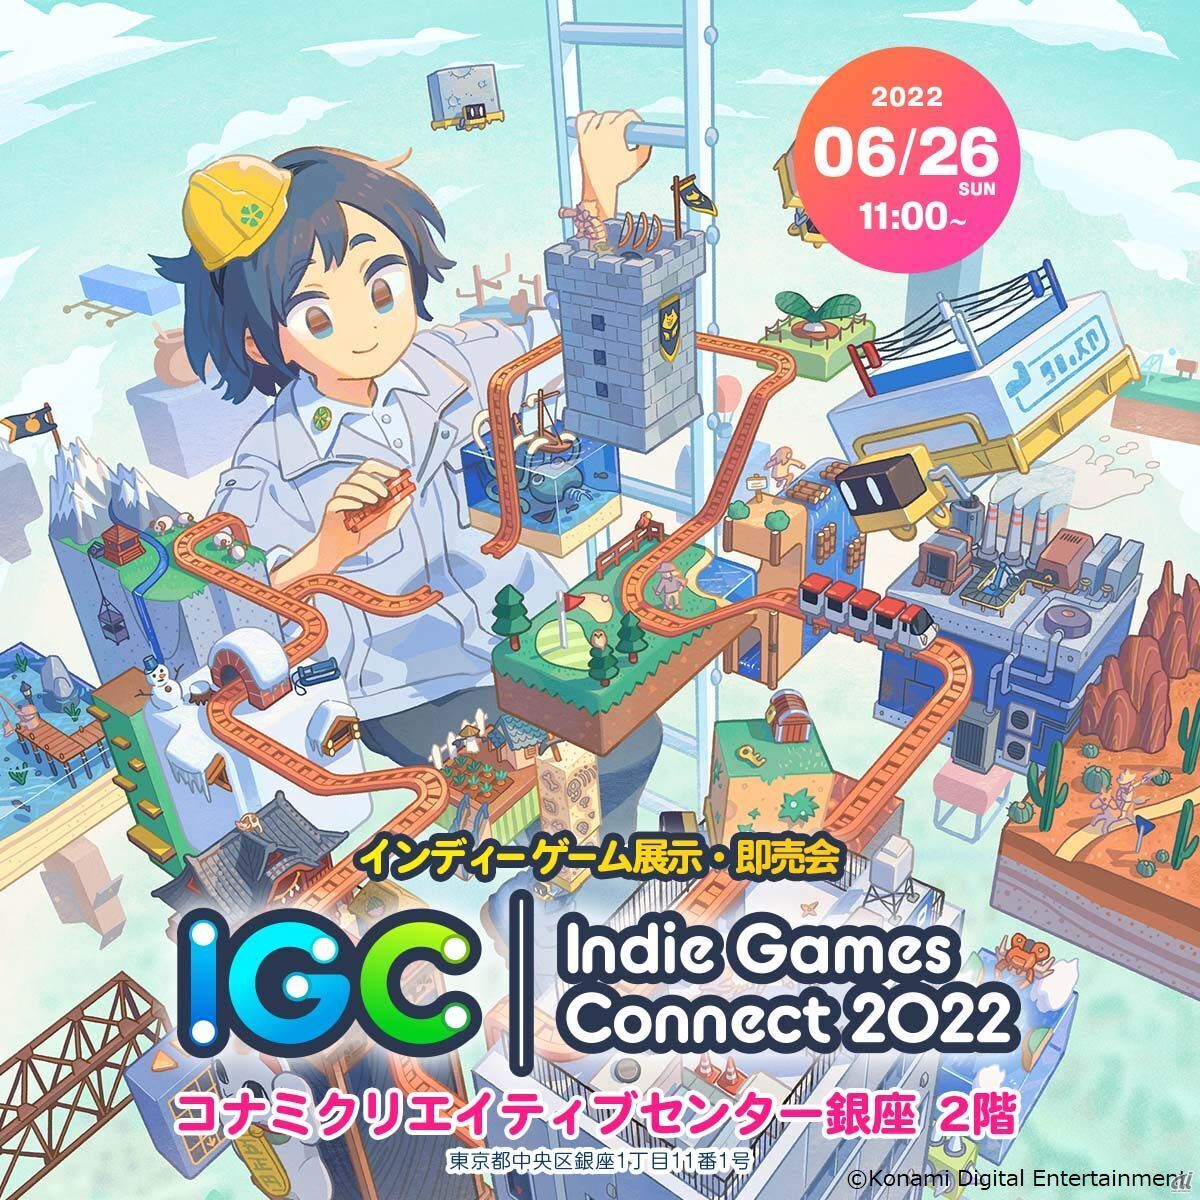 「Indie Games Connect 2022」イメージビジュアル